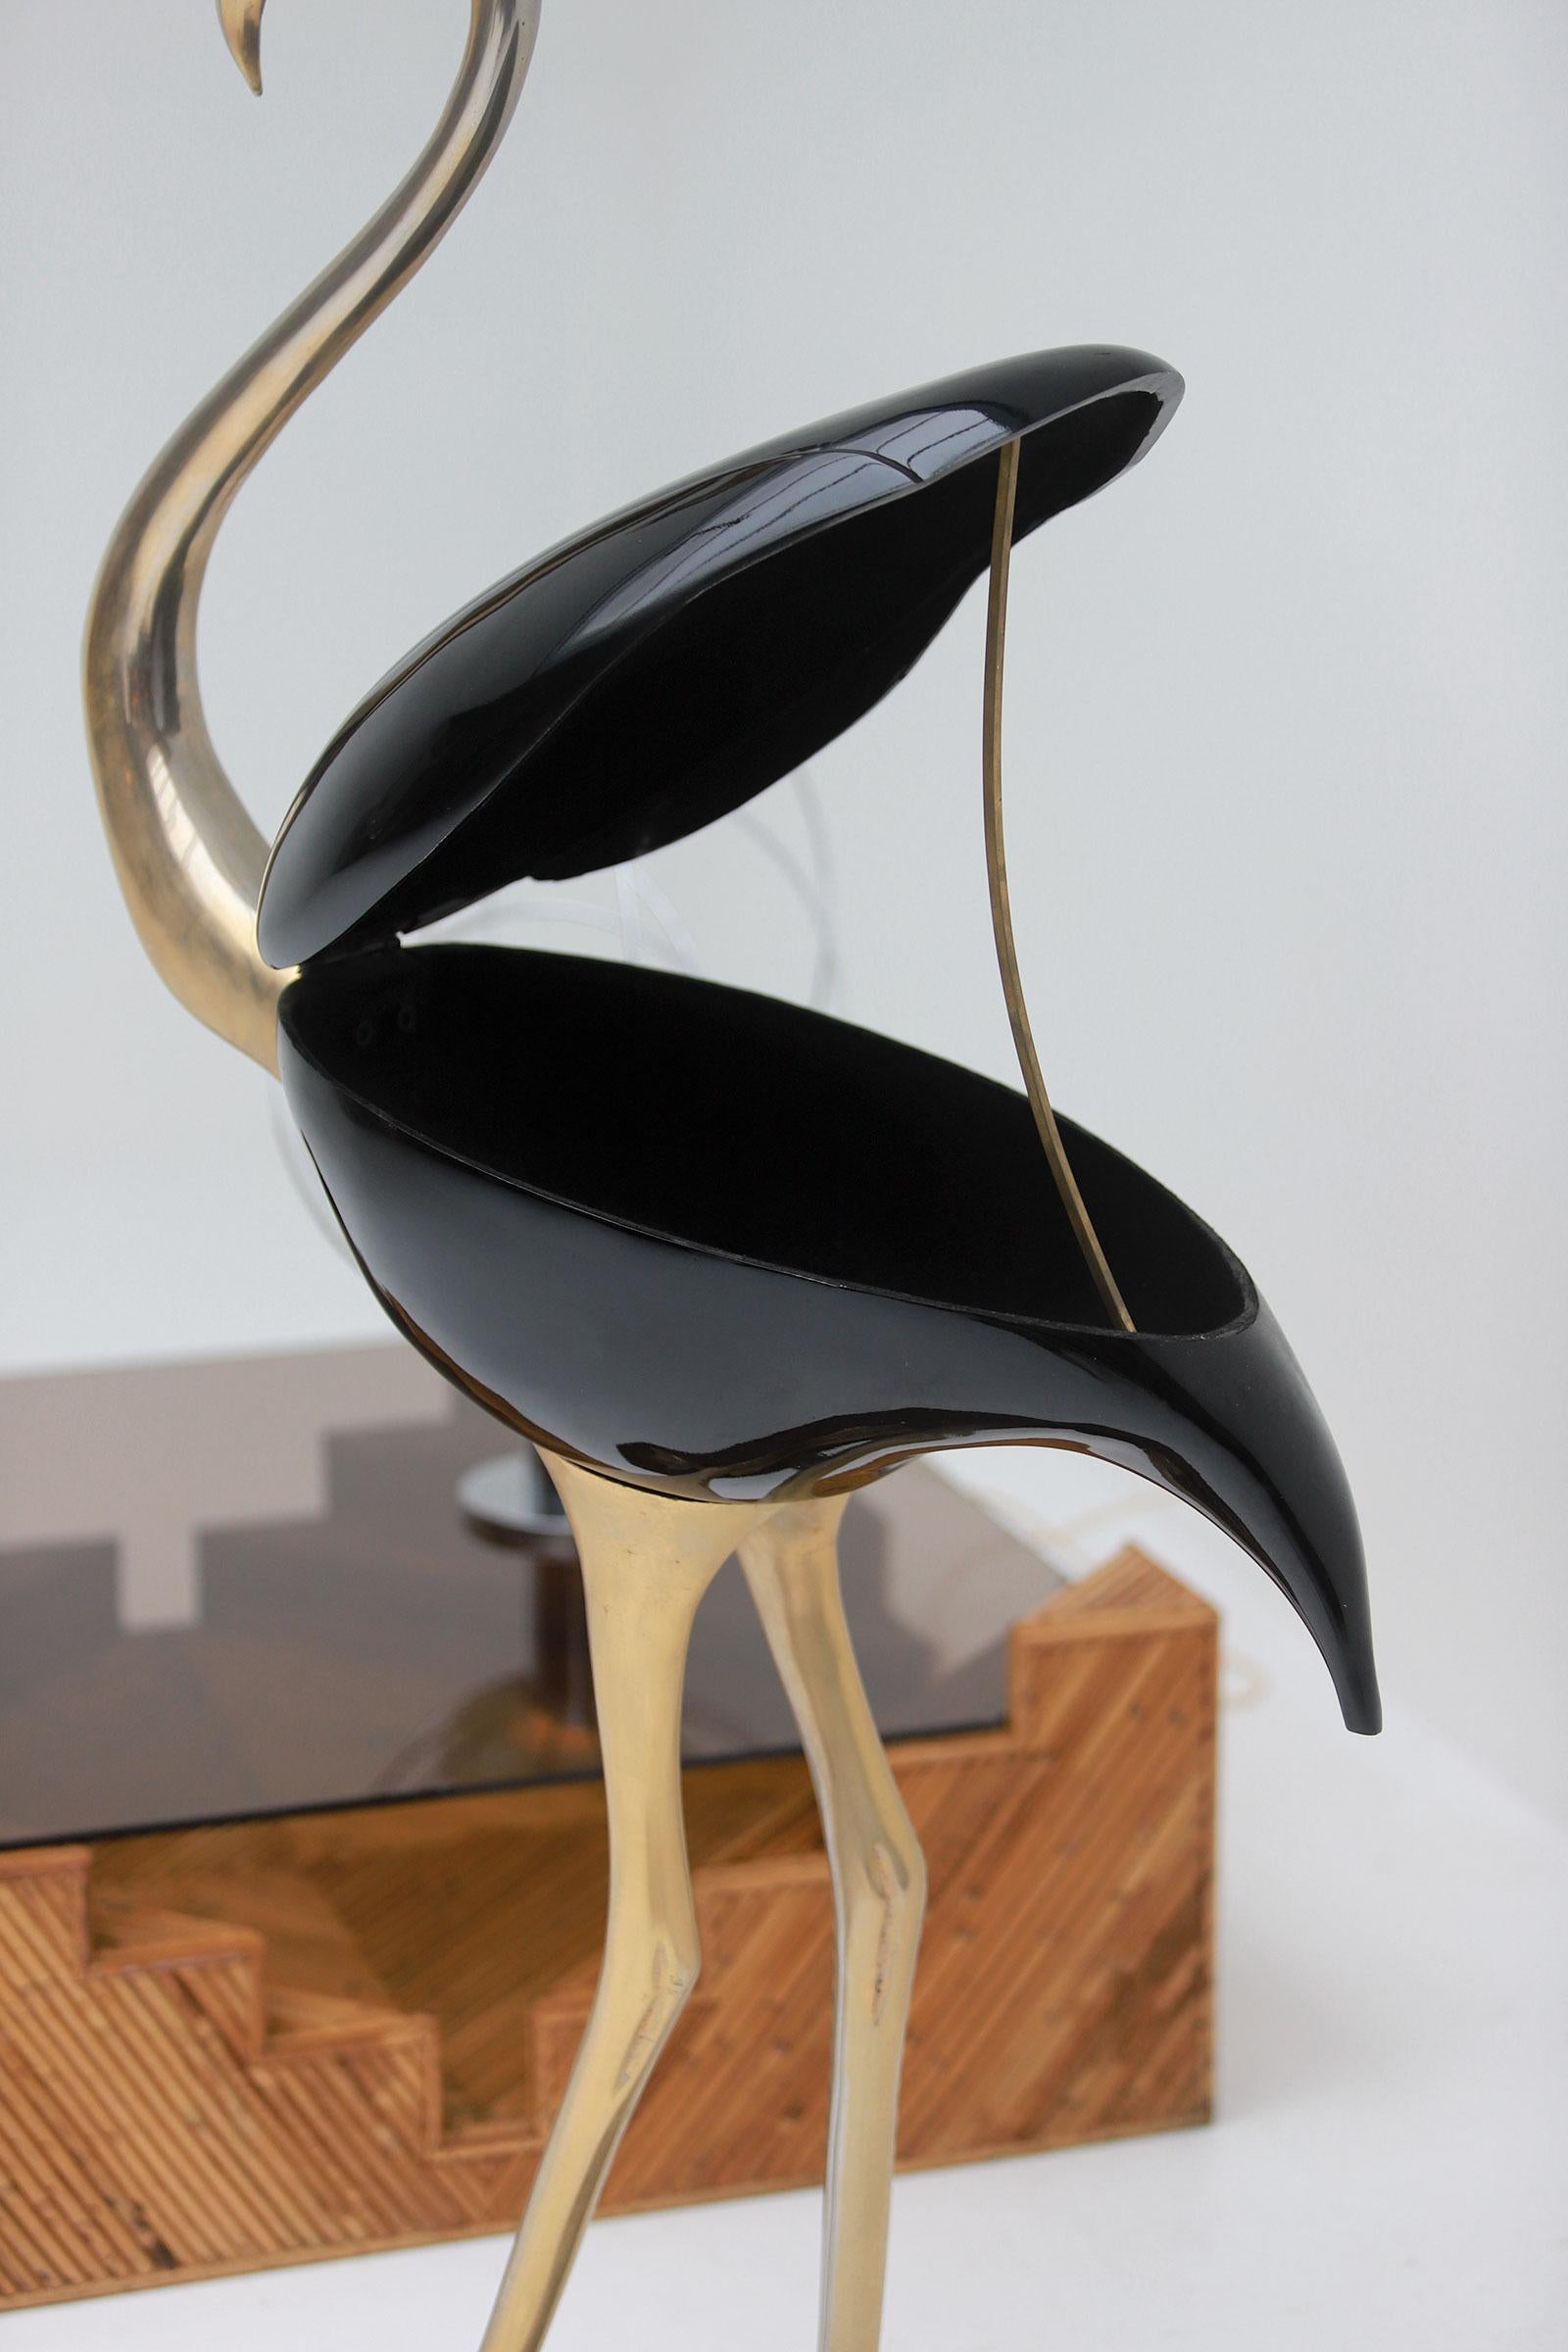 Lifesize Brass Flamingo with storage compartment by Fondica 1970s For Sale 1